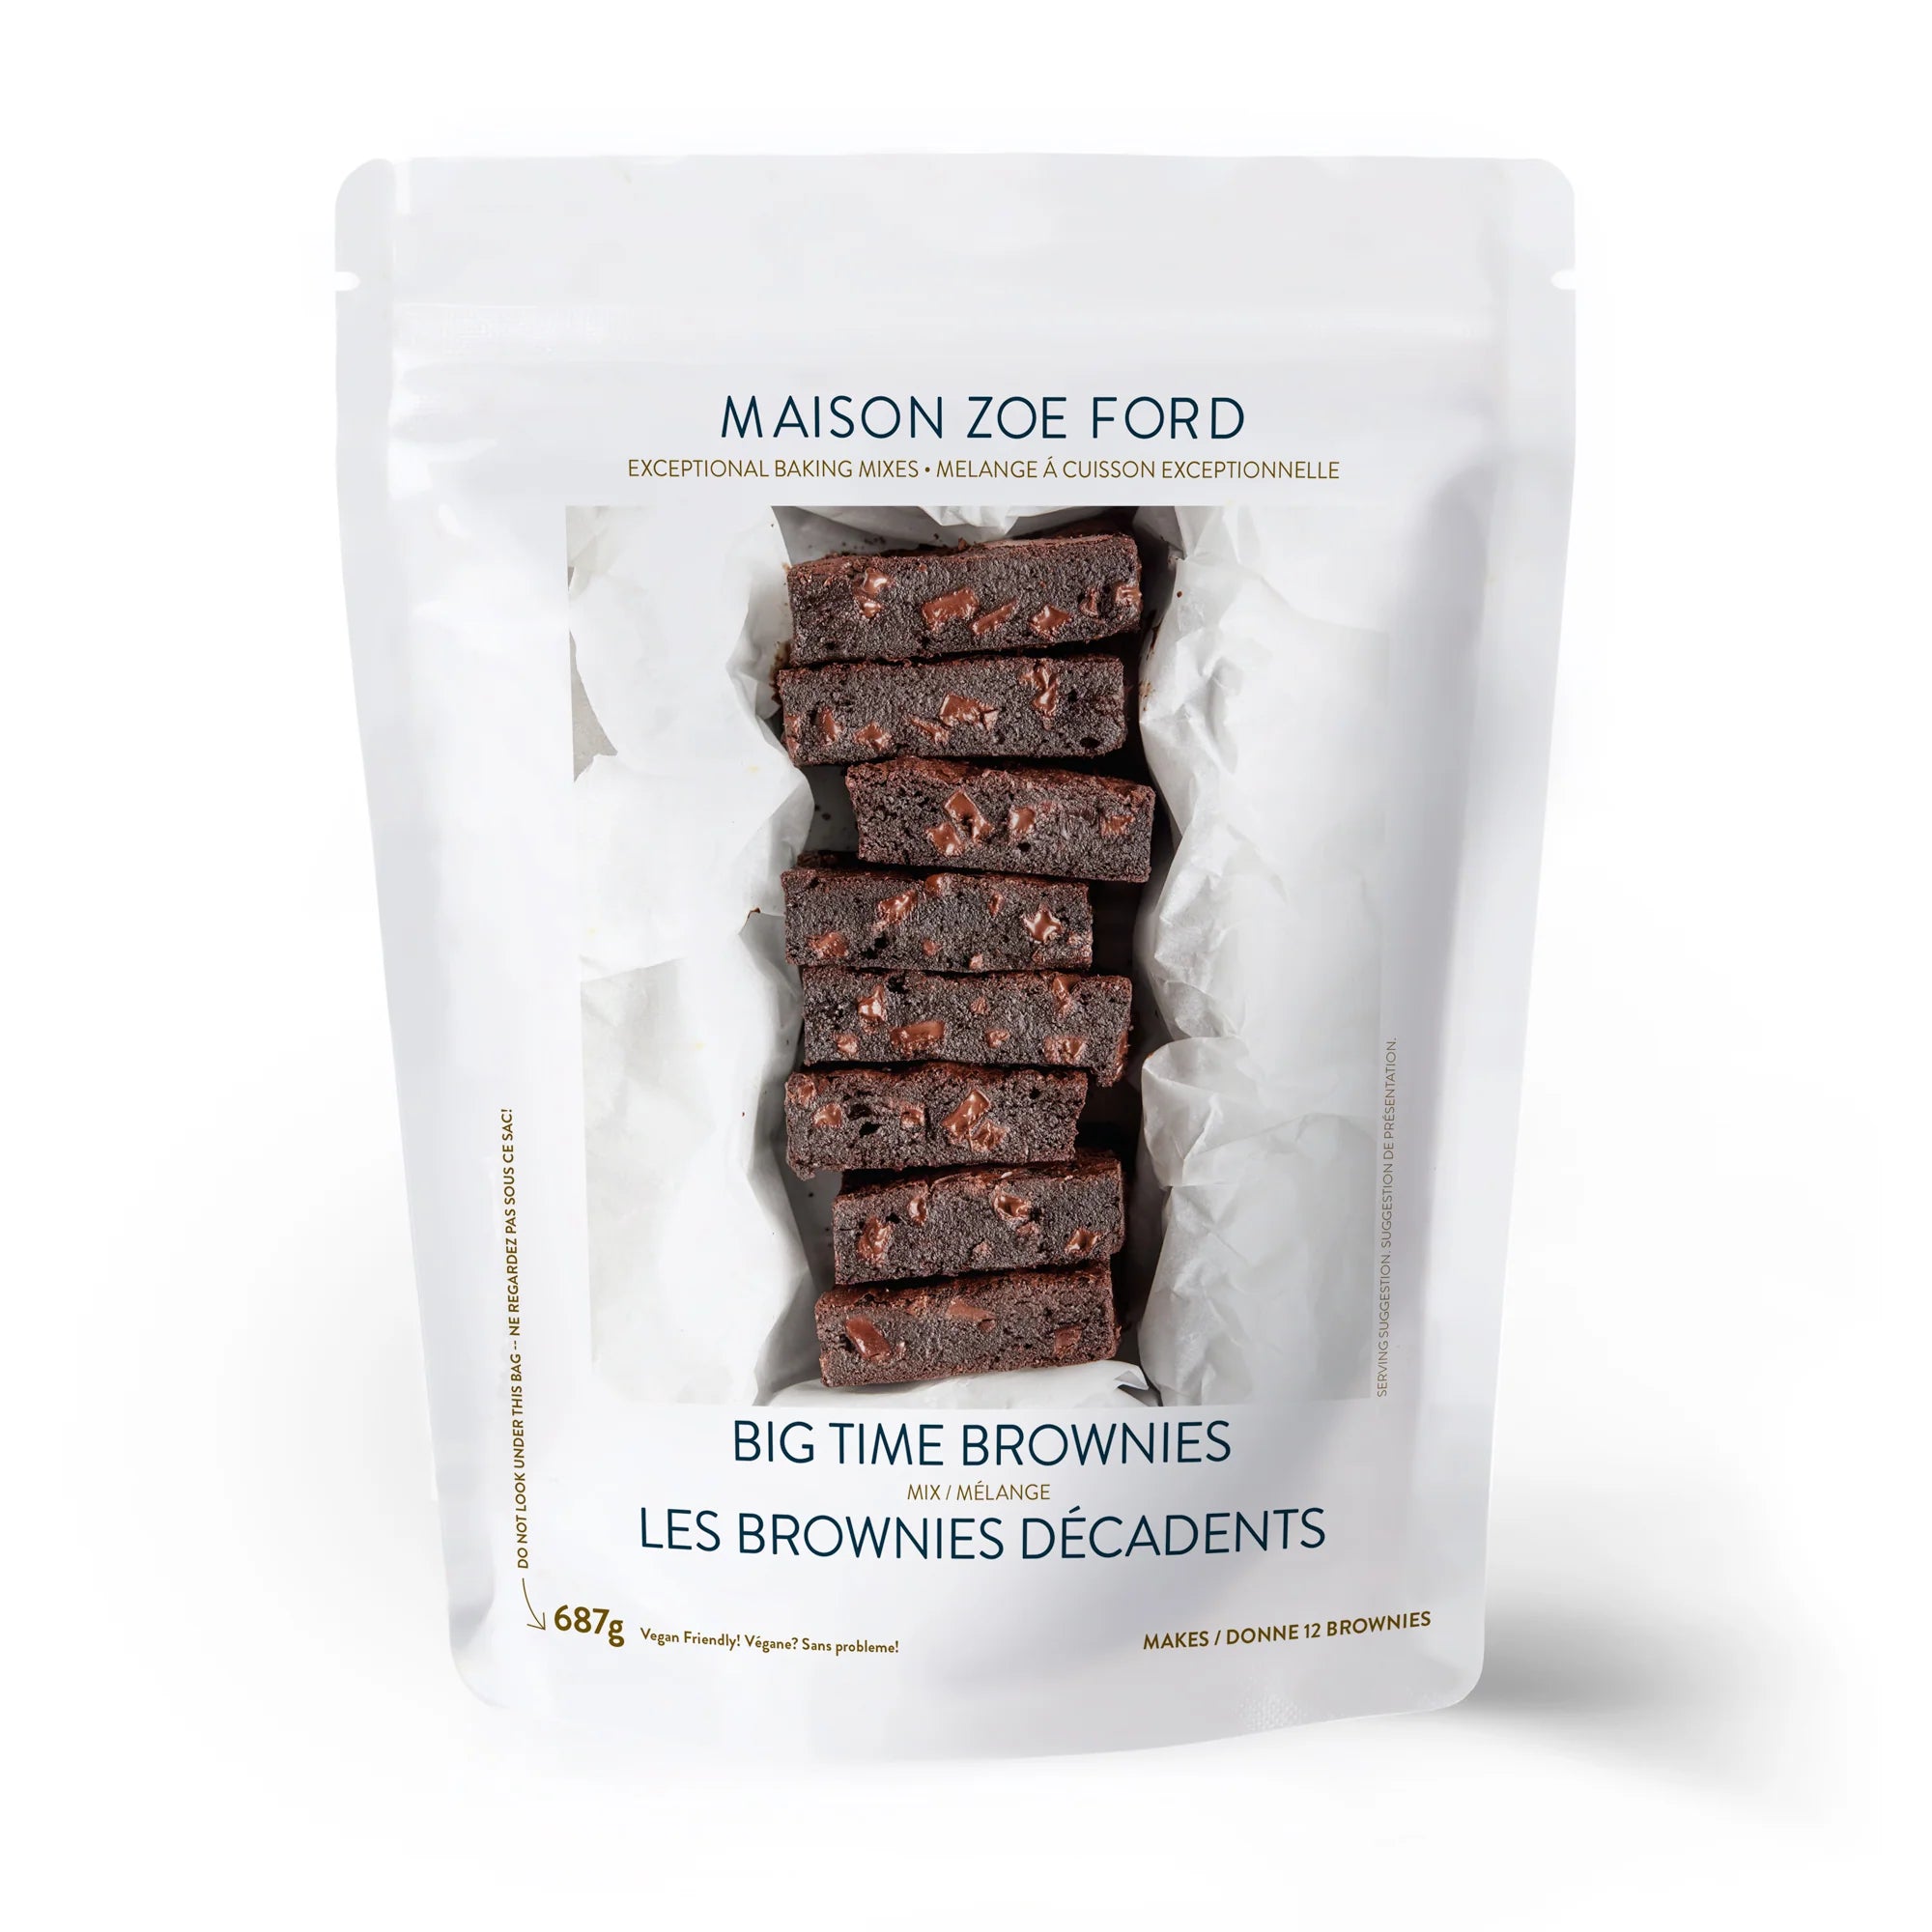 Maison Zoe Ford Baking Mixes, Food Options